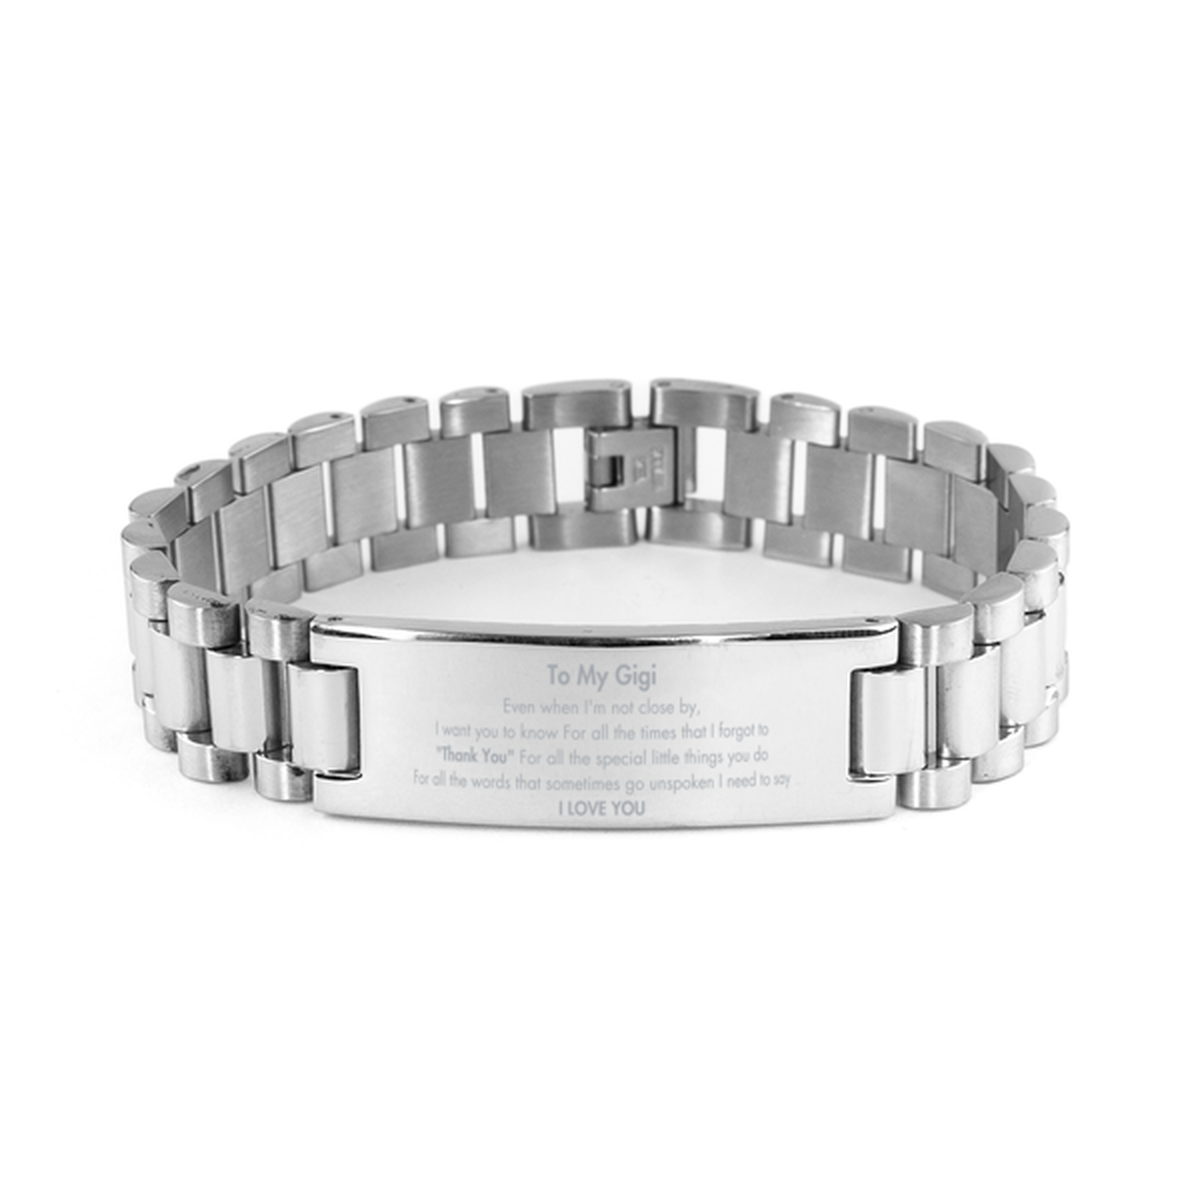 Thank You Gifts for Gigi, Keepsake Ladder Stainless Steel Bracelet Gifts for Gigi Birthday Mother's day Father's Day Gigi For all the words That sometimes go unspoken I need to say I LOVE YOU